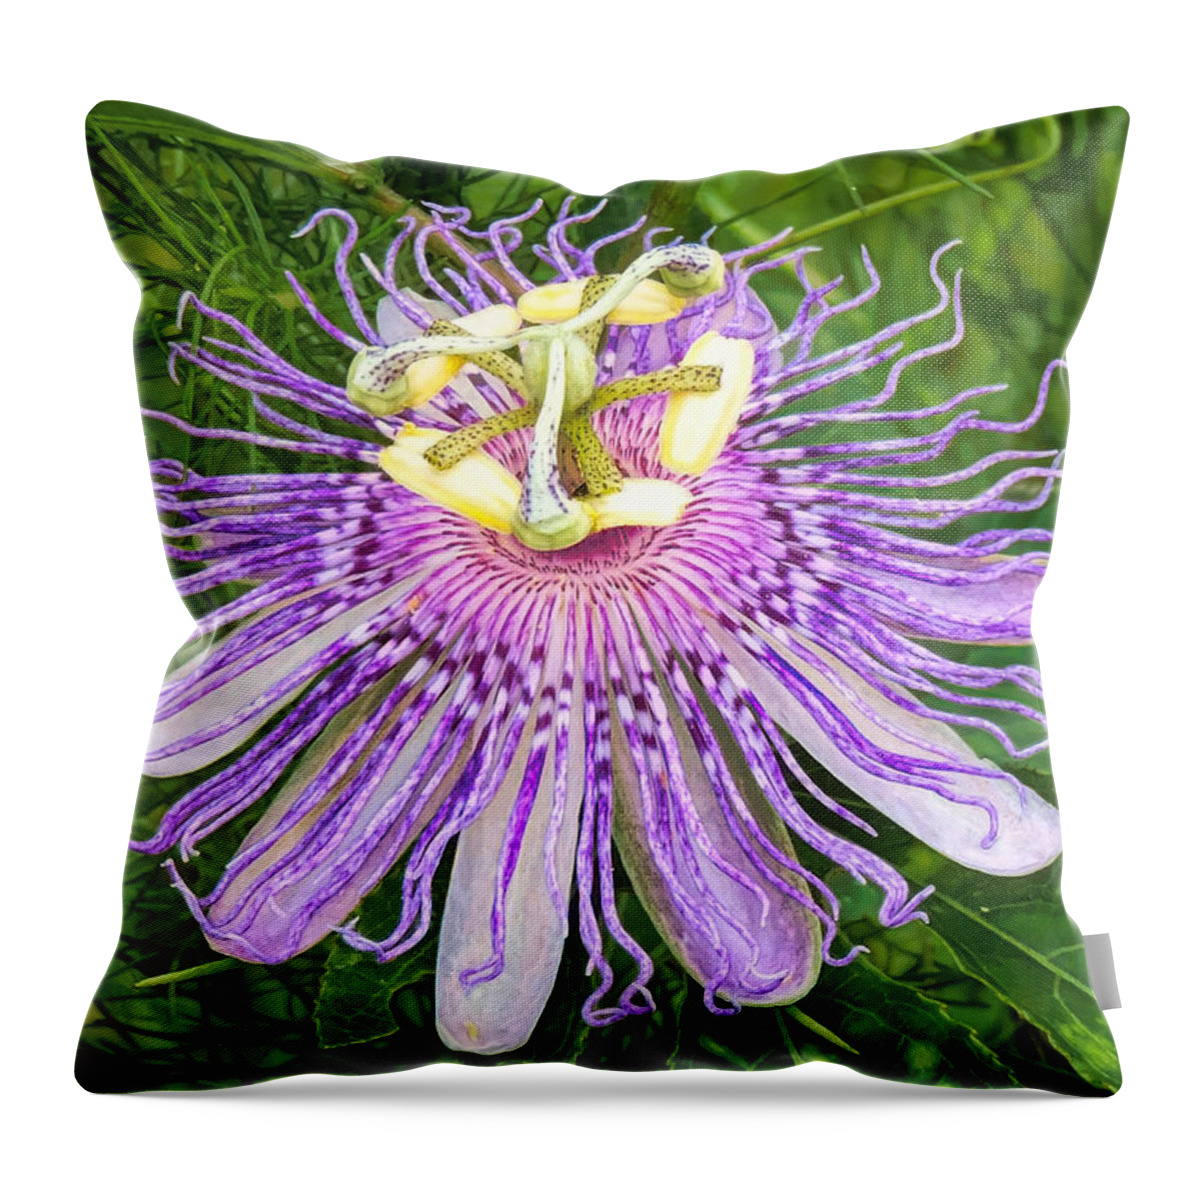 Purple Passion Flower Throw Pillow featuring the photograph Purple Passion Flower by Susan Hope Finley